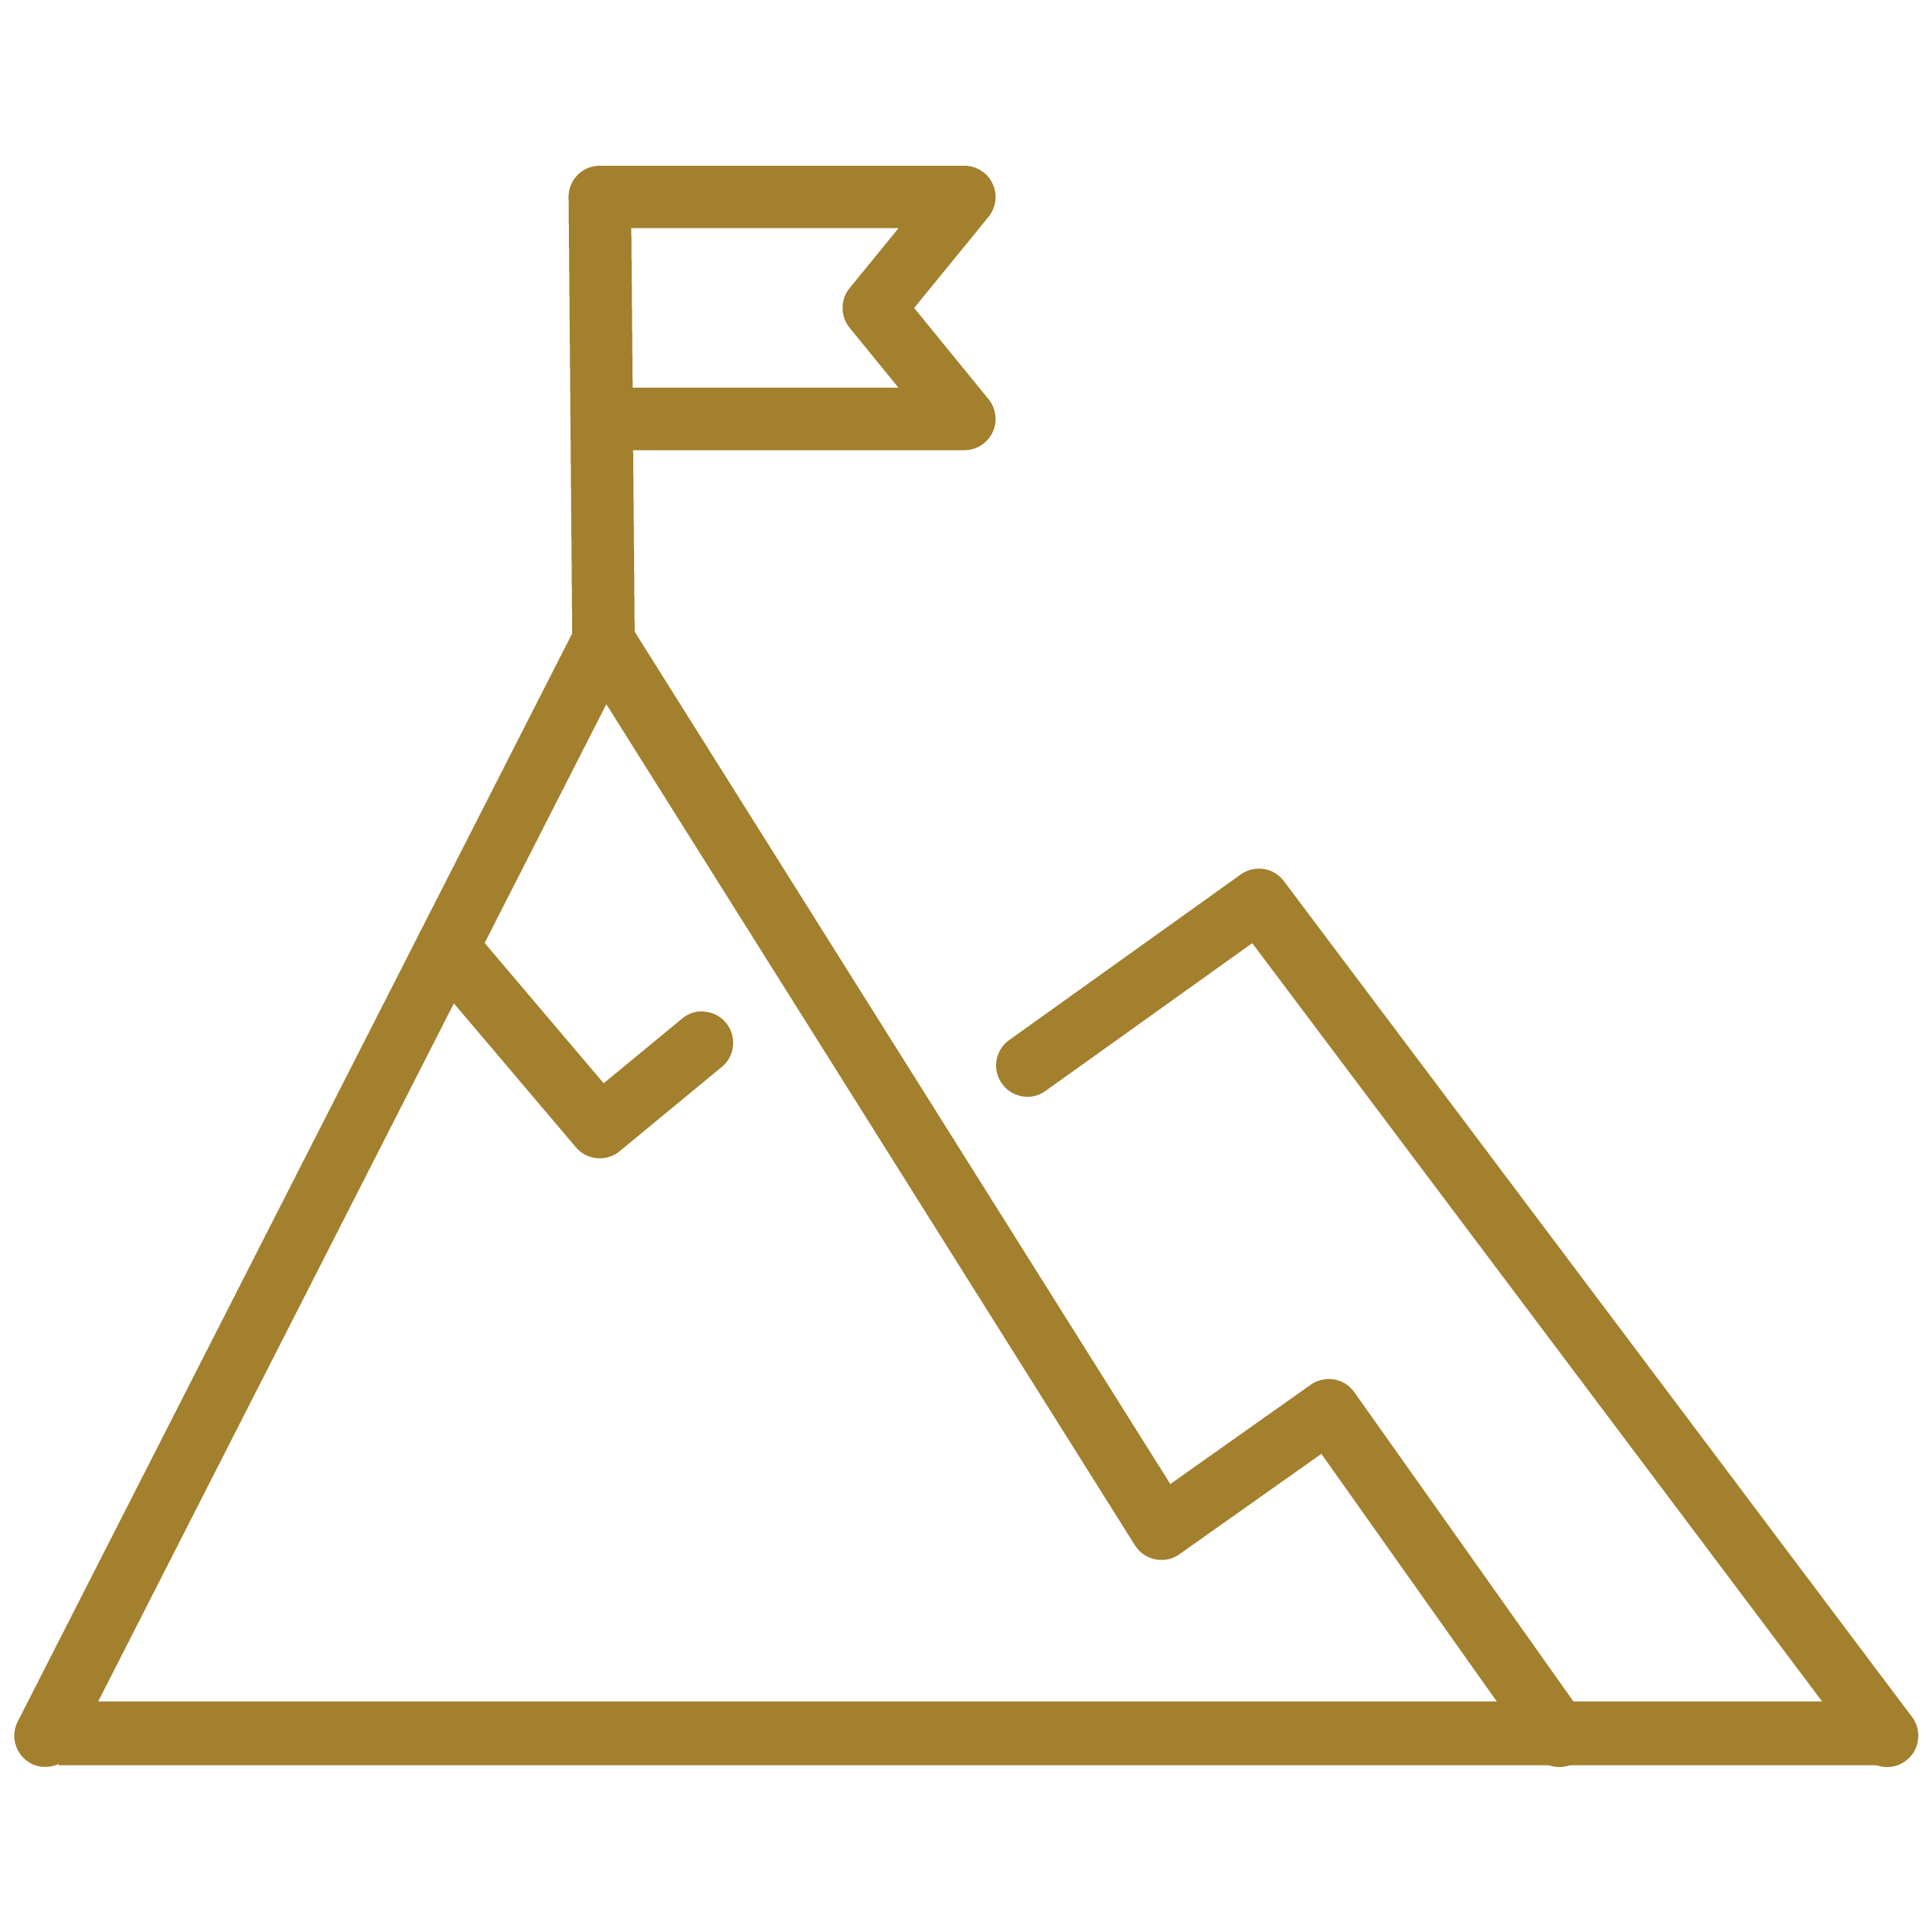 Gold icon of mountains with flag on top